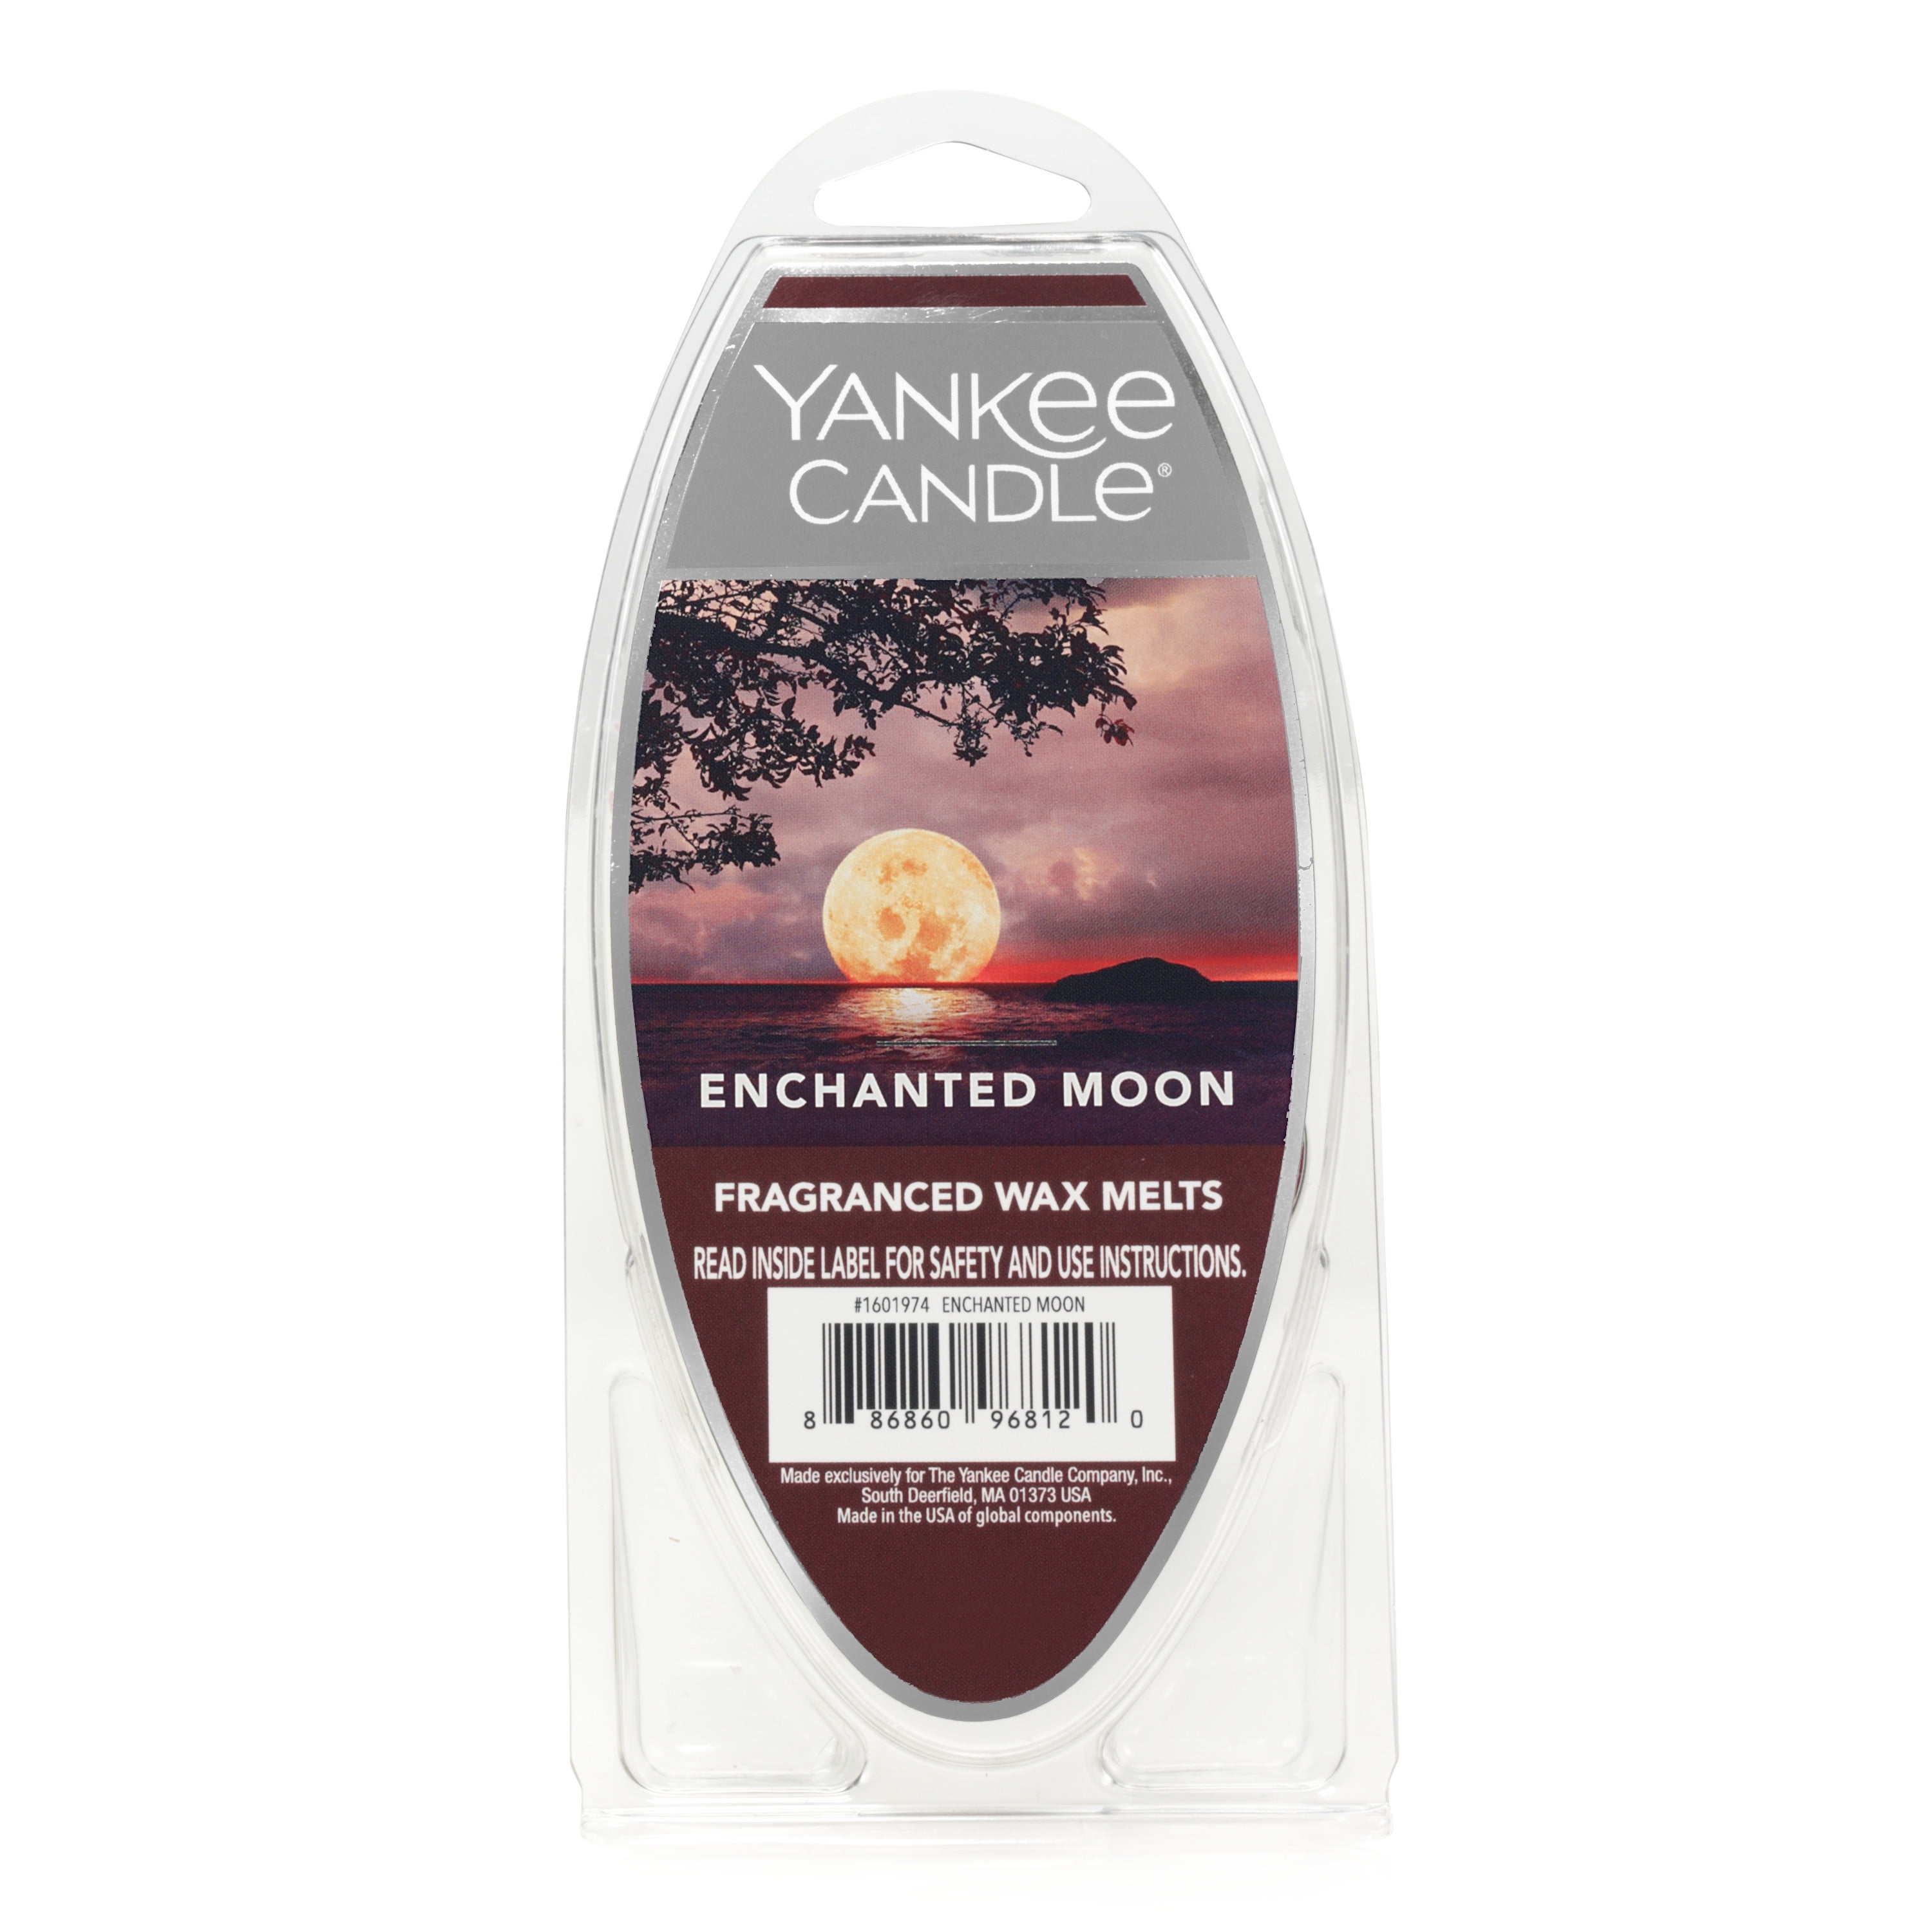 Brand New Genuine Enchanted Moon Yankee Candle Scent Plug Refill 